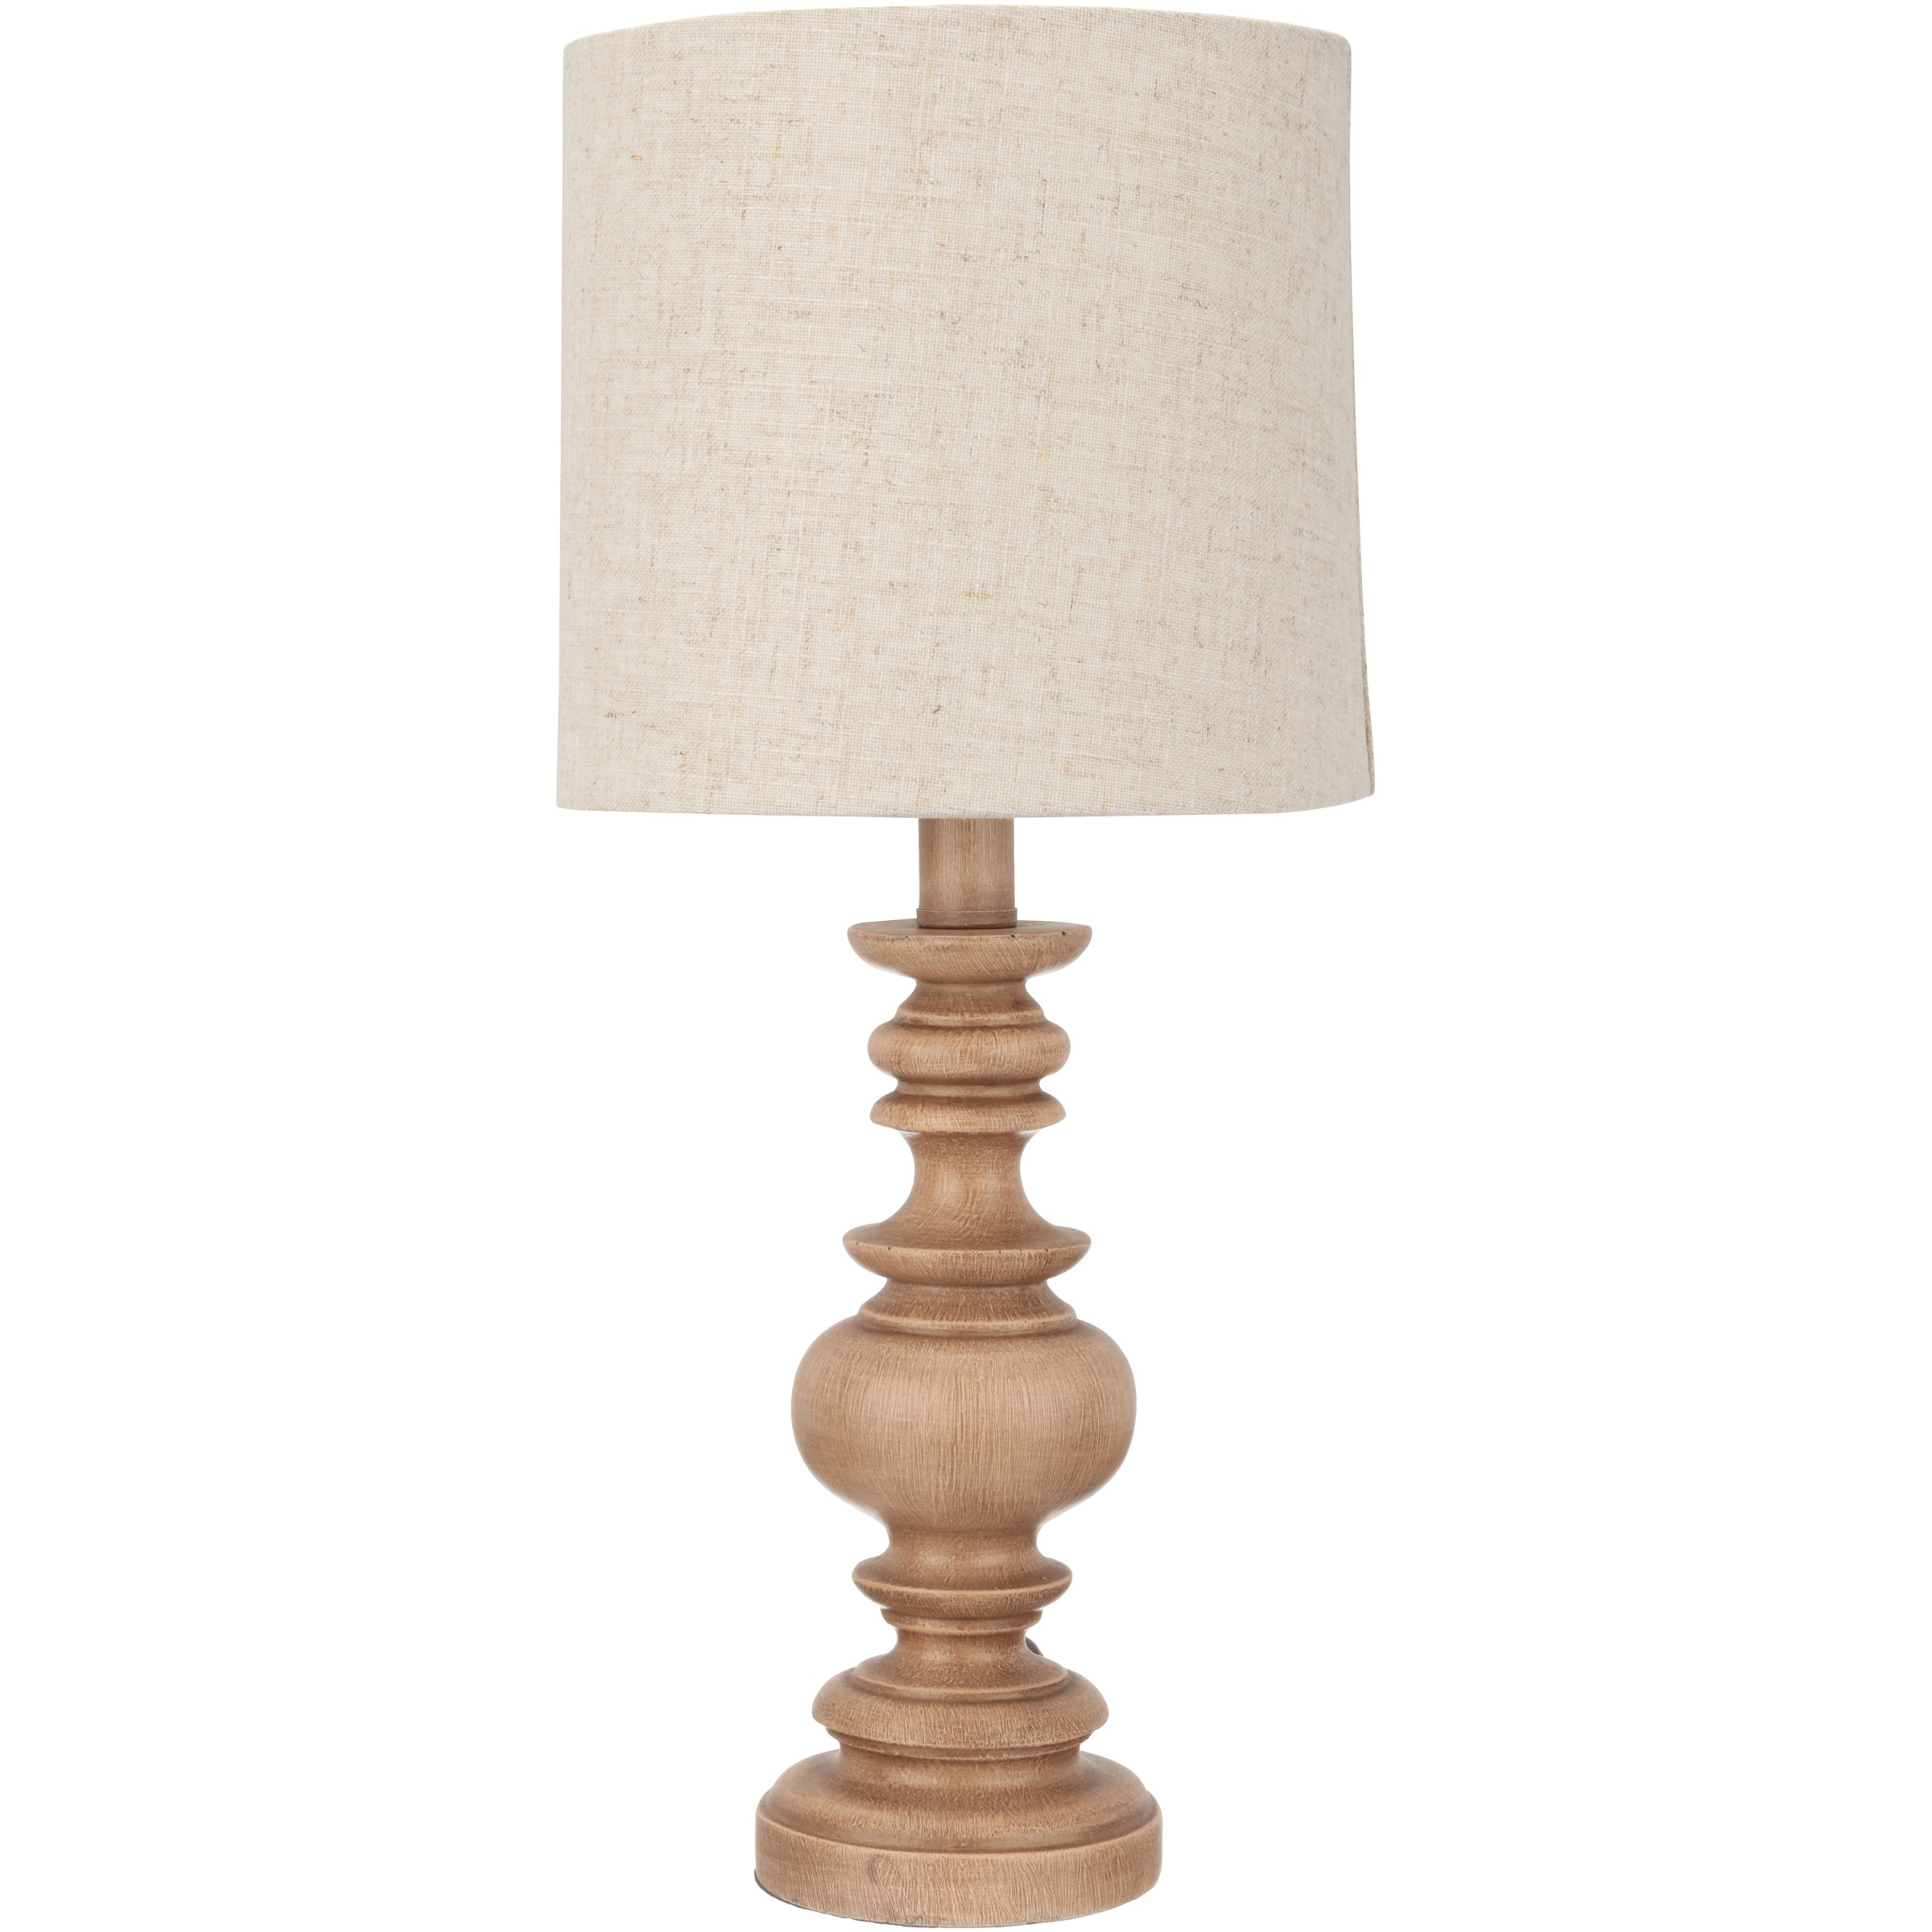 Mainstays Washed Wood Table Lamp, White Washed Wood Table Lamps